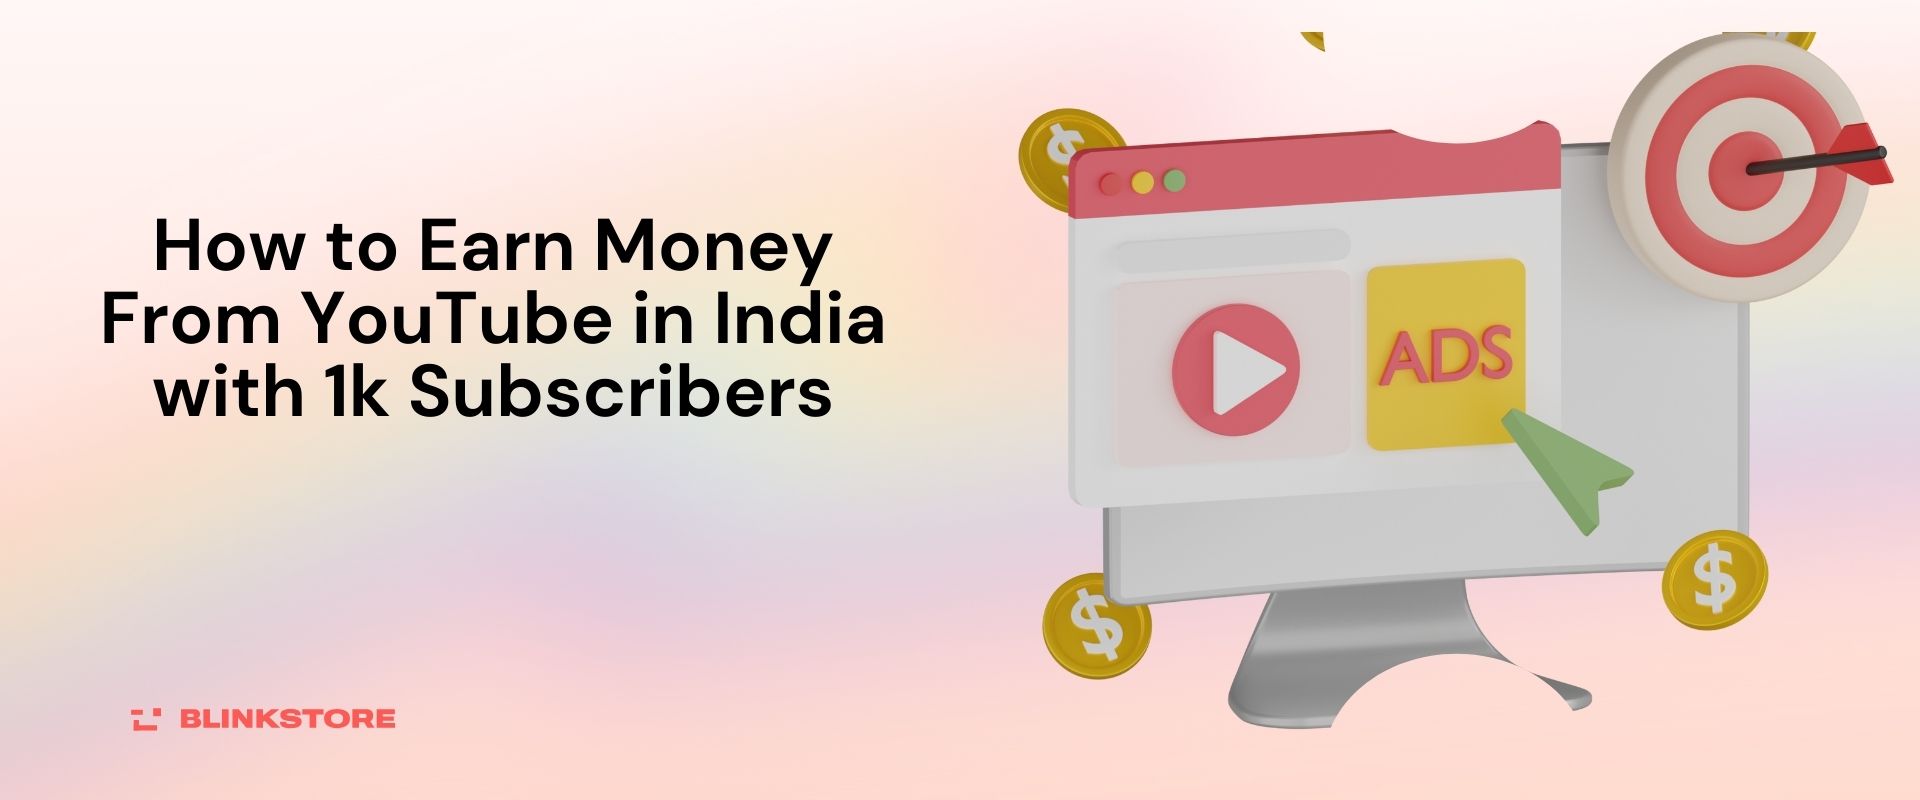 How to Earn Money From YouTube in India with 1k Subscribers